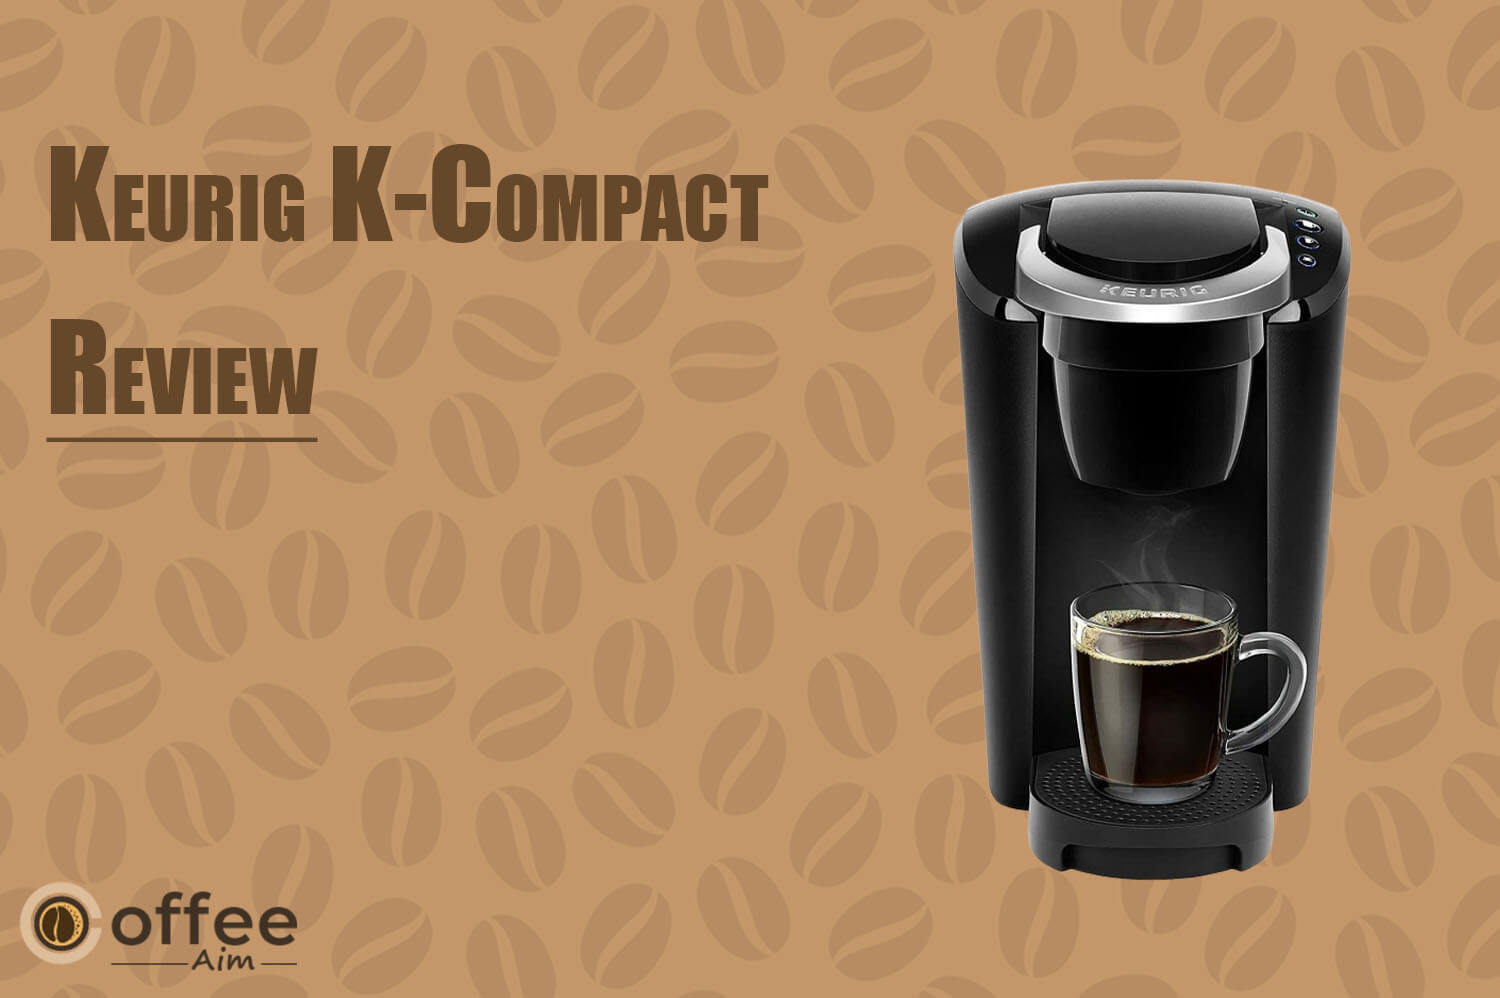 Featured image for the article "Keurig K-Compact review"